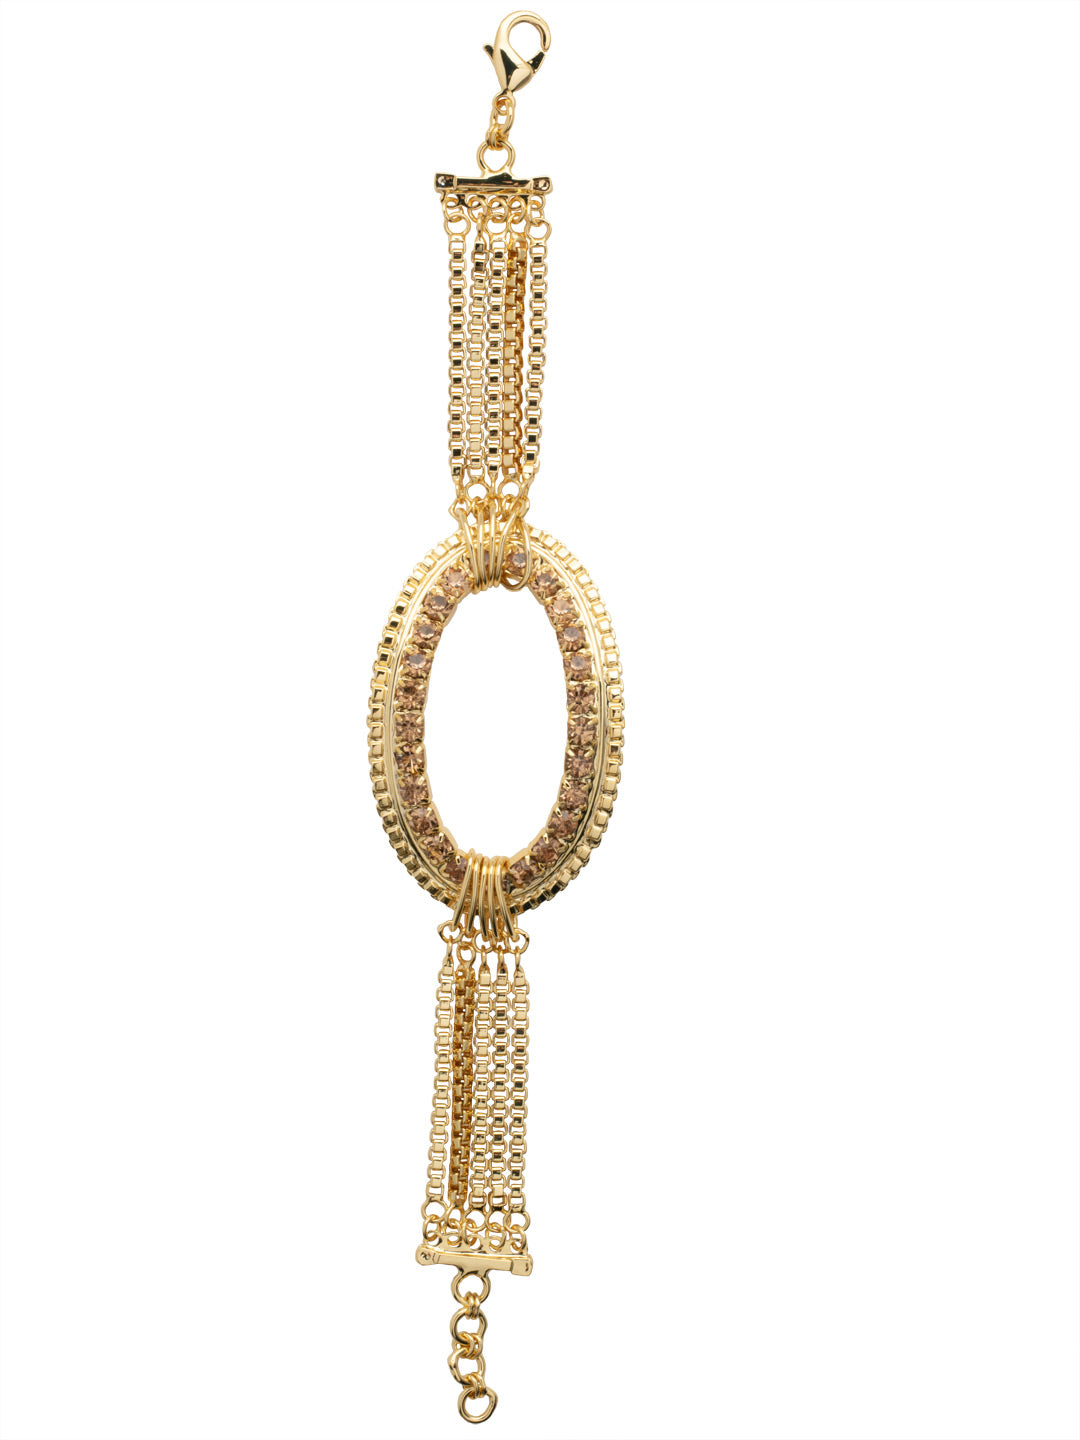 Sierra Layered Bracelet - BFC46BGRSU - <p>The Sierra Layered Bracelet features a crystal embellished oval hoop with layers of box chains, connected on an adjustable chain secured with a lobster claw clasp. From Sorrelli's Raw Sugar collection in our Bright Gold-tone finish.</p>